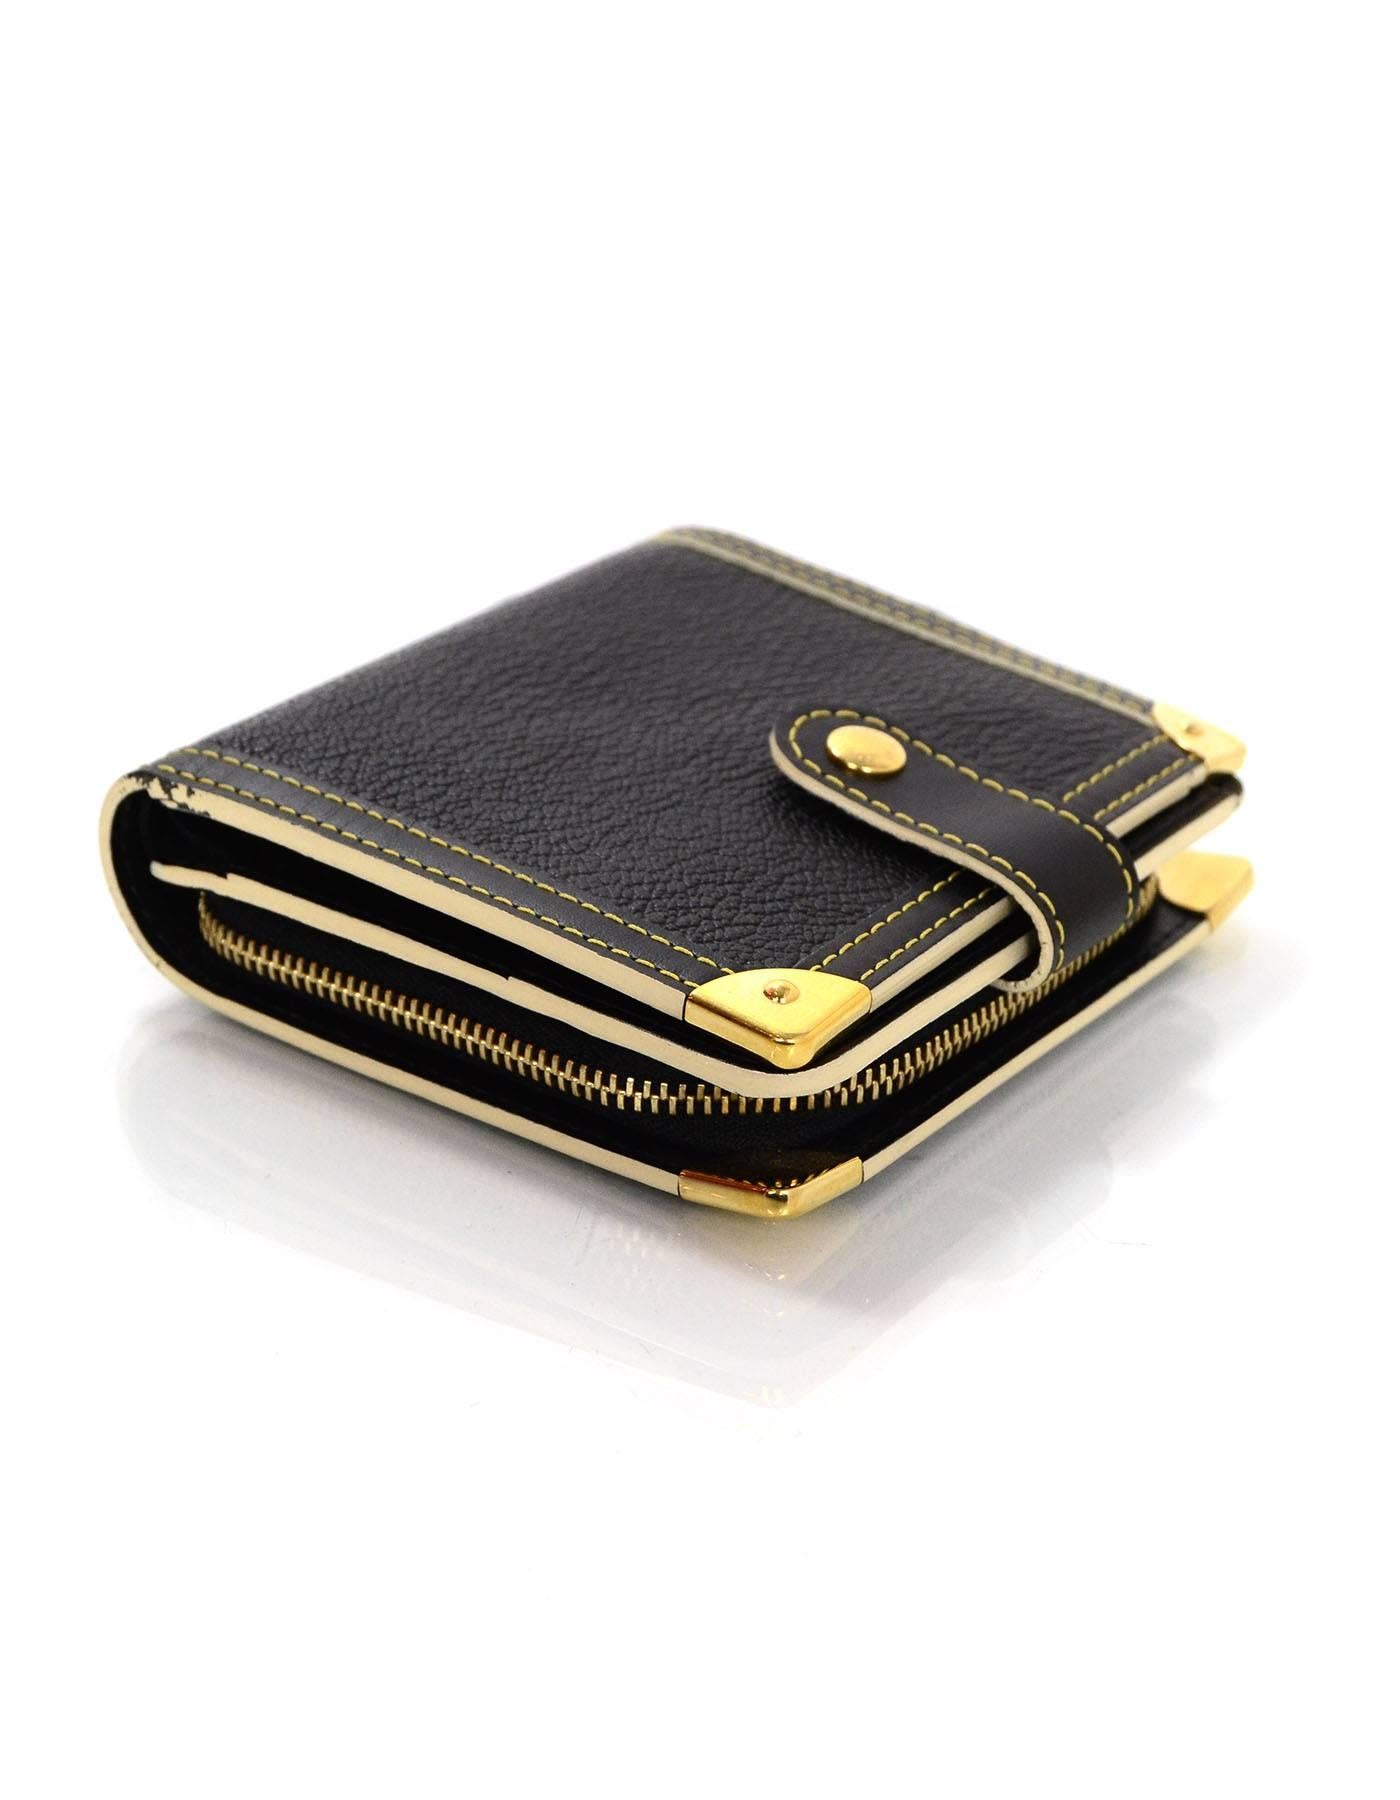 Louis Vuitton Black Leather Suhali Wallet

Made In: France
Year of Production: 2004
Color: Black, gold
Hardware: Goldtone
Materials: Leather
Lining: Black leather
Closure/Opening: Bi fold with snap closure
Exterior Pockets: None
Interior Pockets: